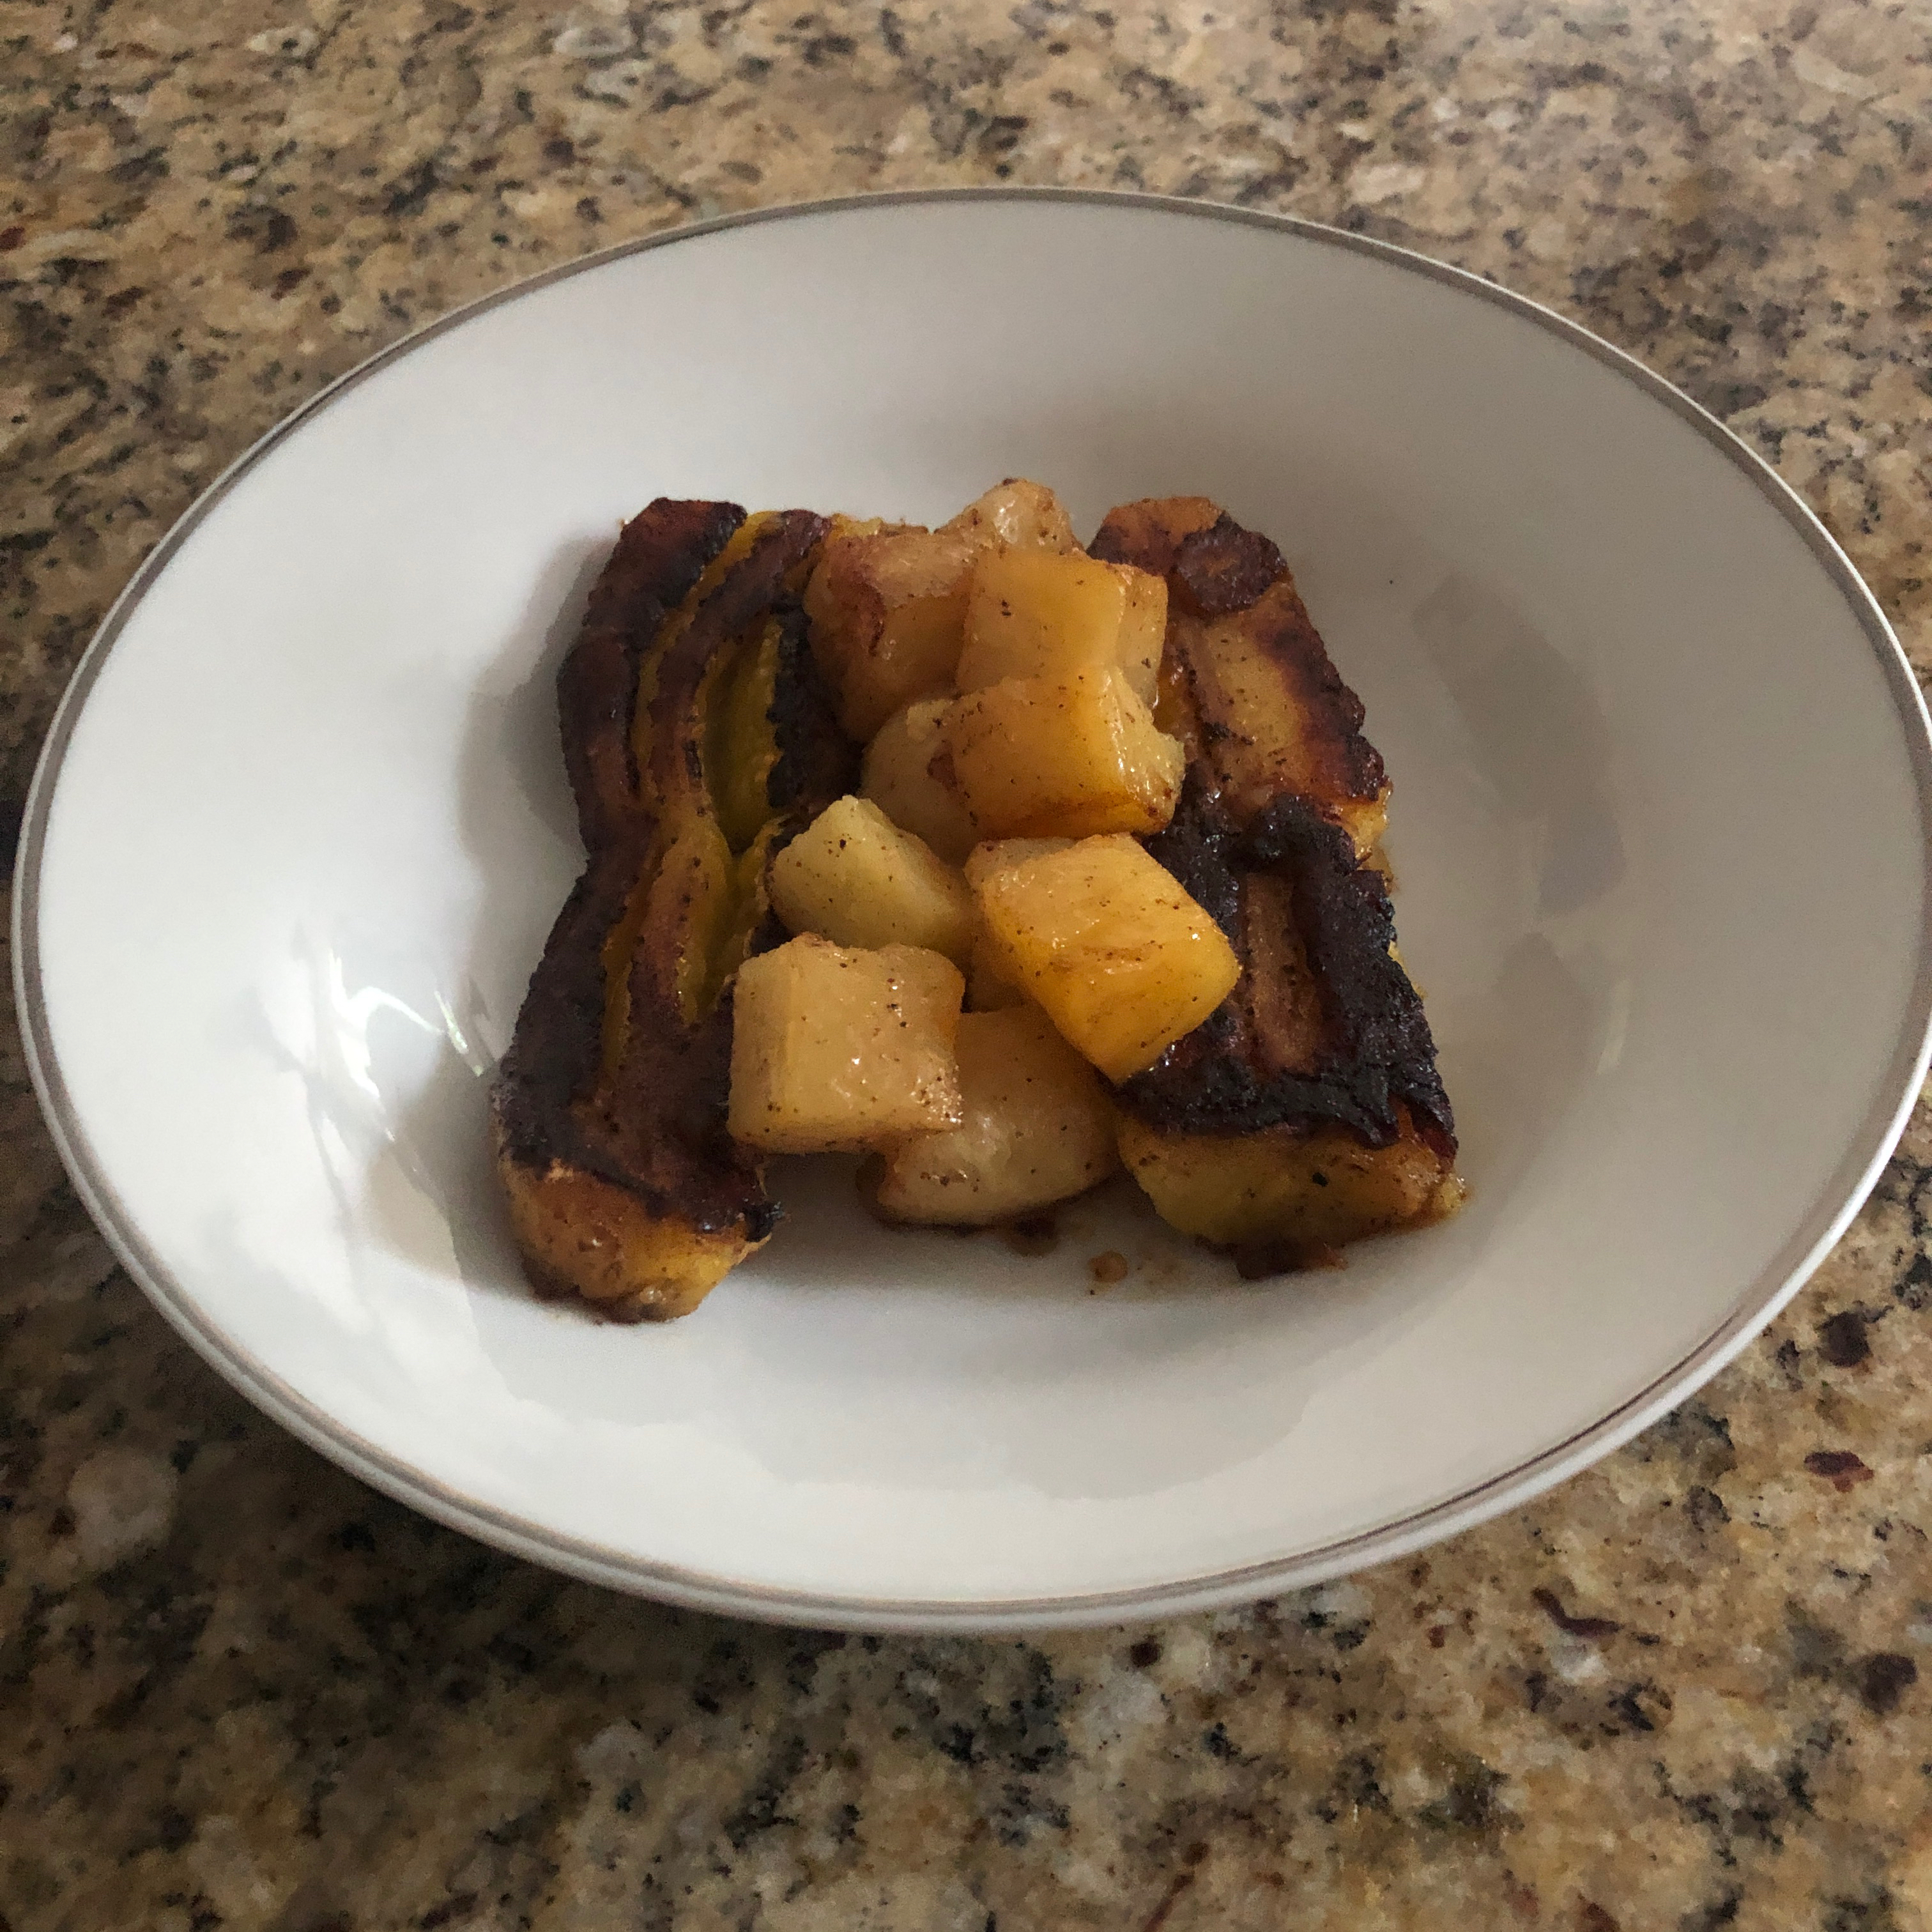 Spiced Plantains and Pineapple